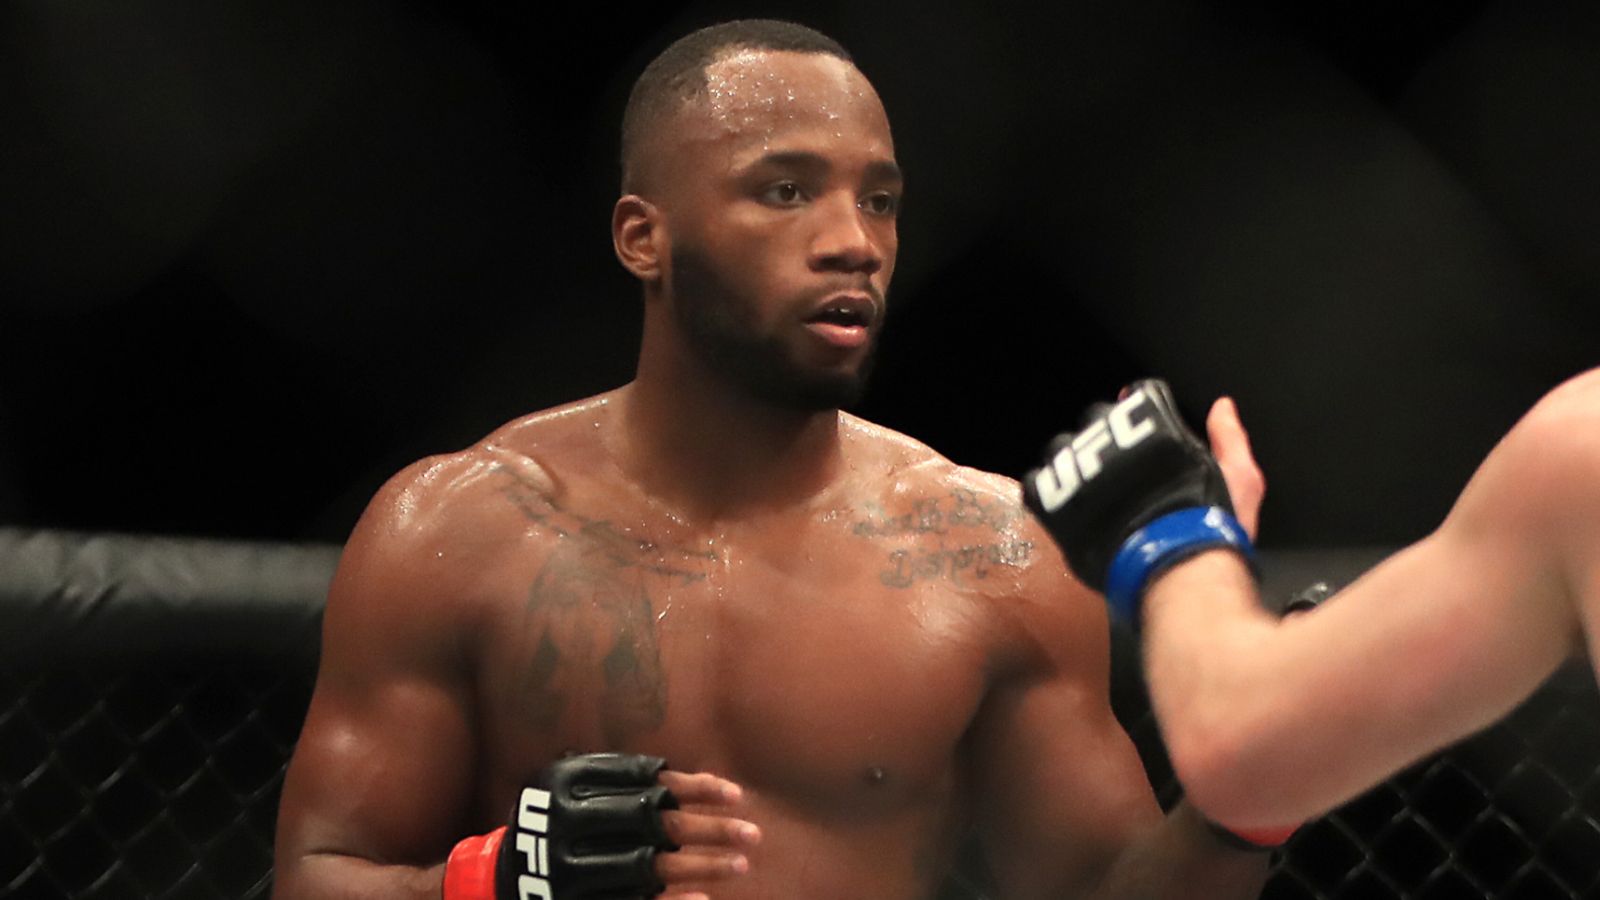 Ufc 263 Leon Edwards Bullish Ahead Of Nate Diaz Fight As He Eyes Welterweight Title Shot Mma News Sky Sports